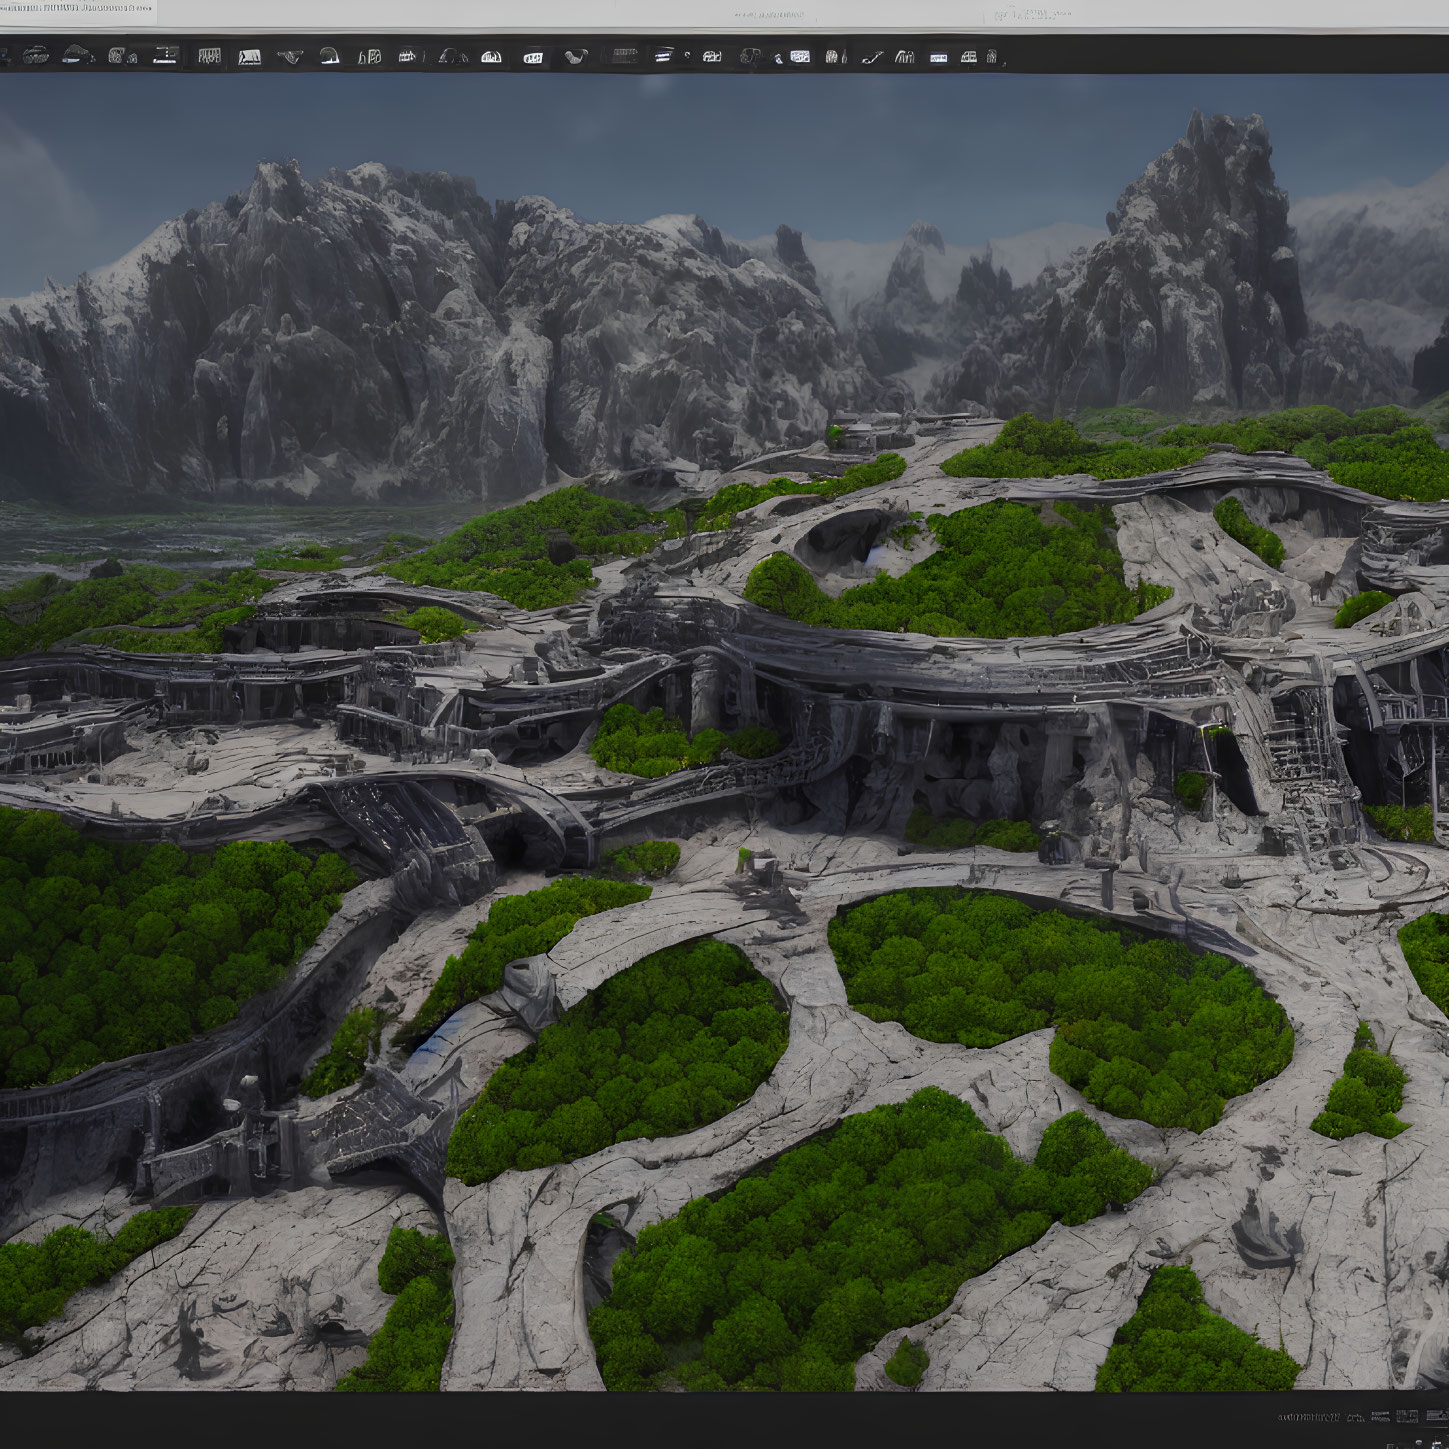 Detailed 3D Render: Ancient Stone City Amid Lush Greenery & Mountains